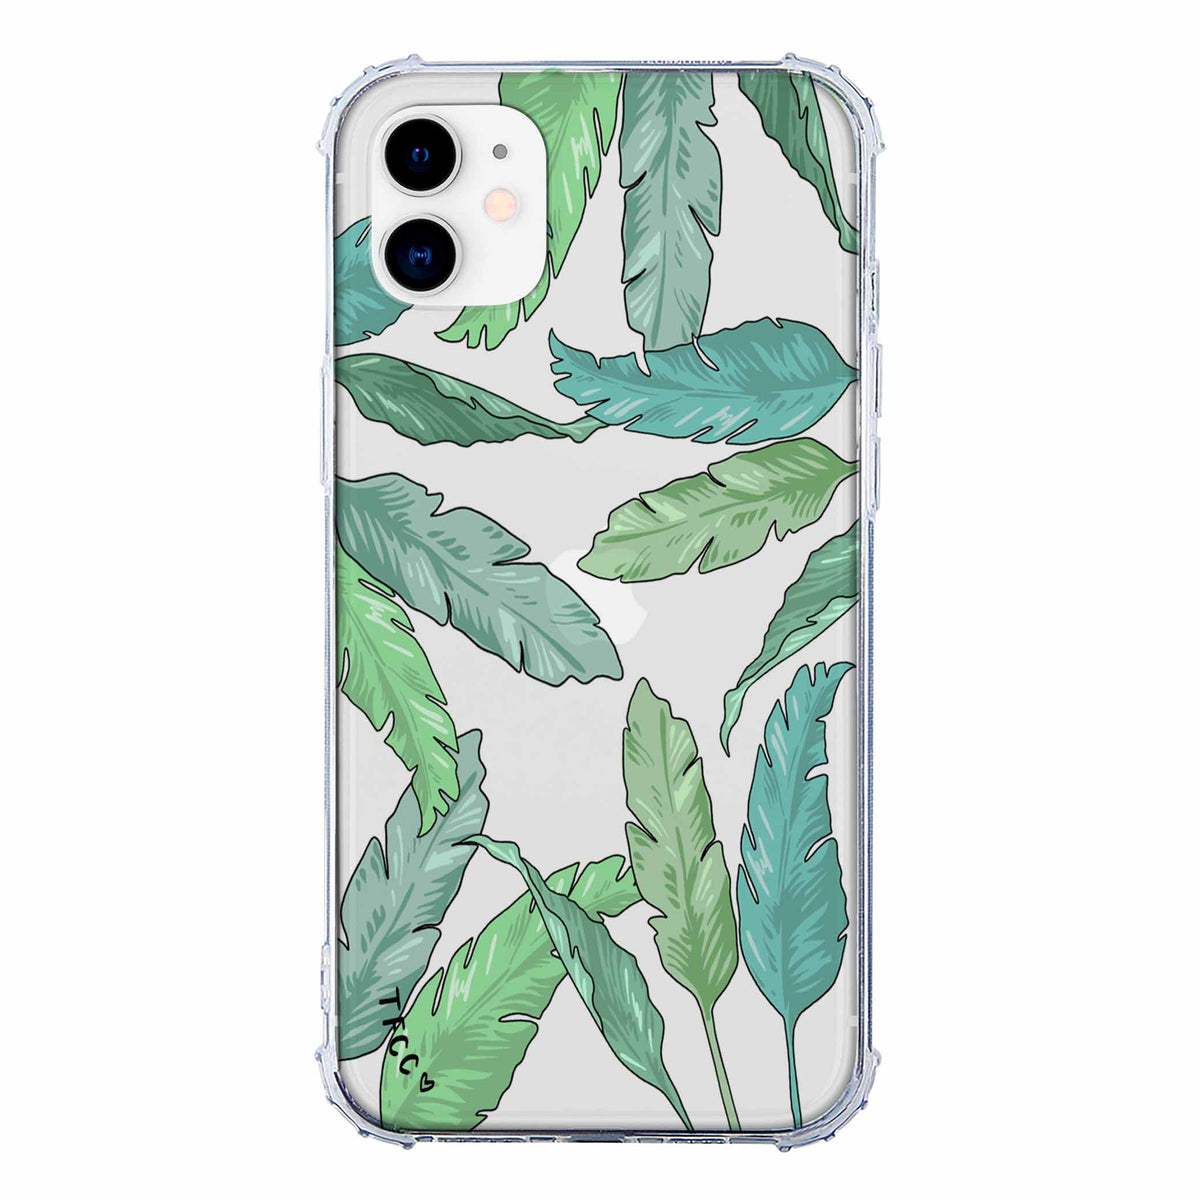 PALM CLEAR CASE - thefonecasecompany